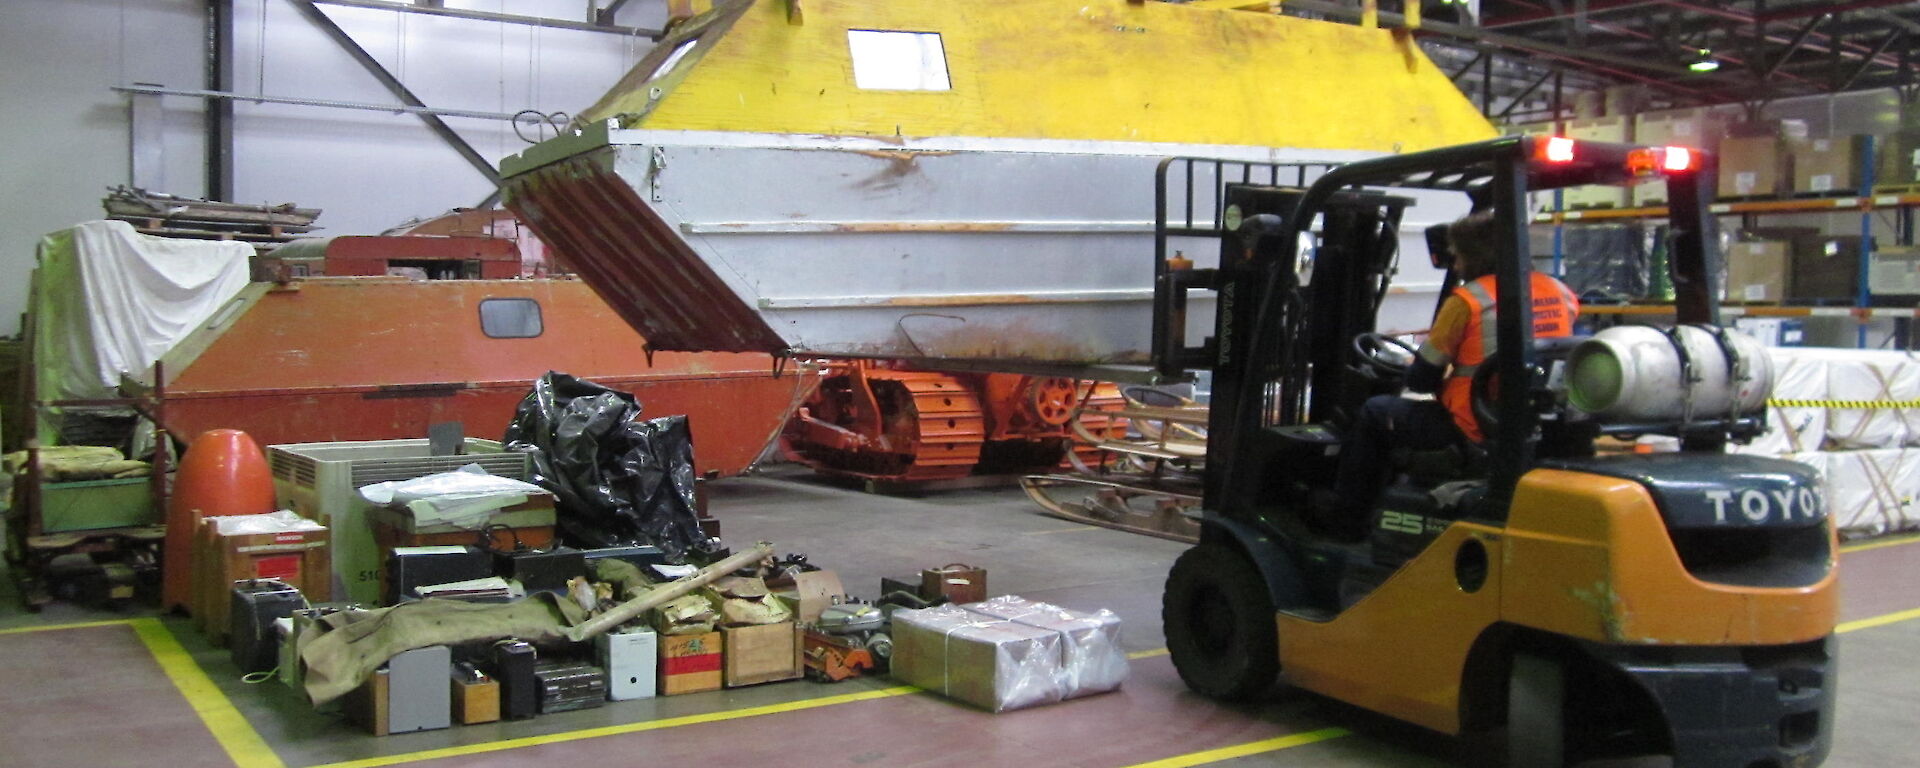 A forklift lowers a barge caravan into place on the warehouse floor